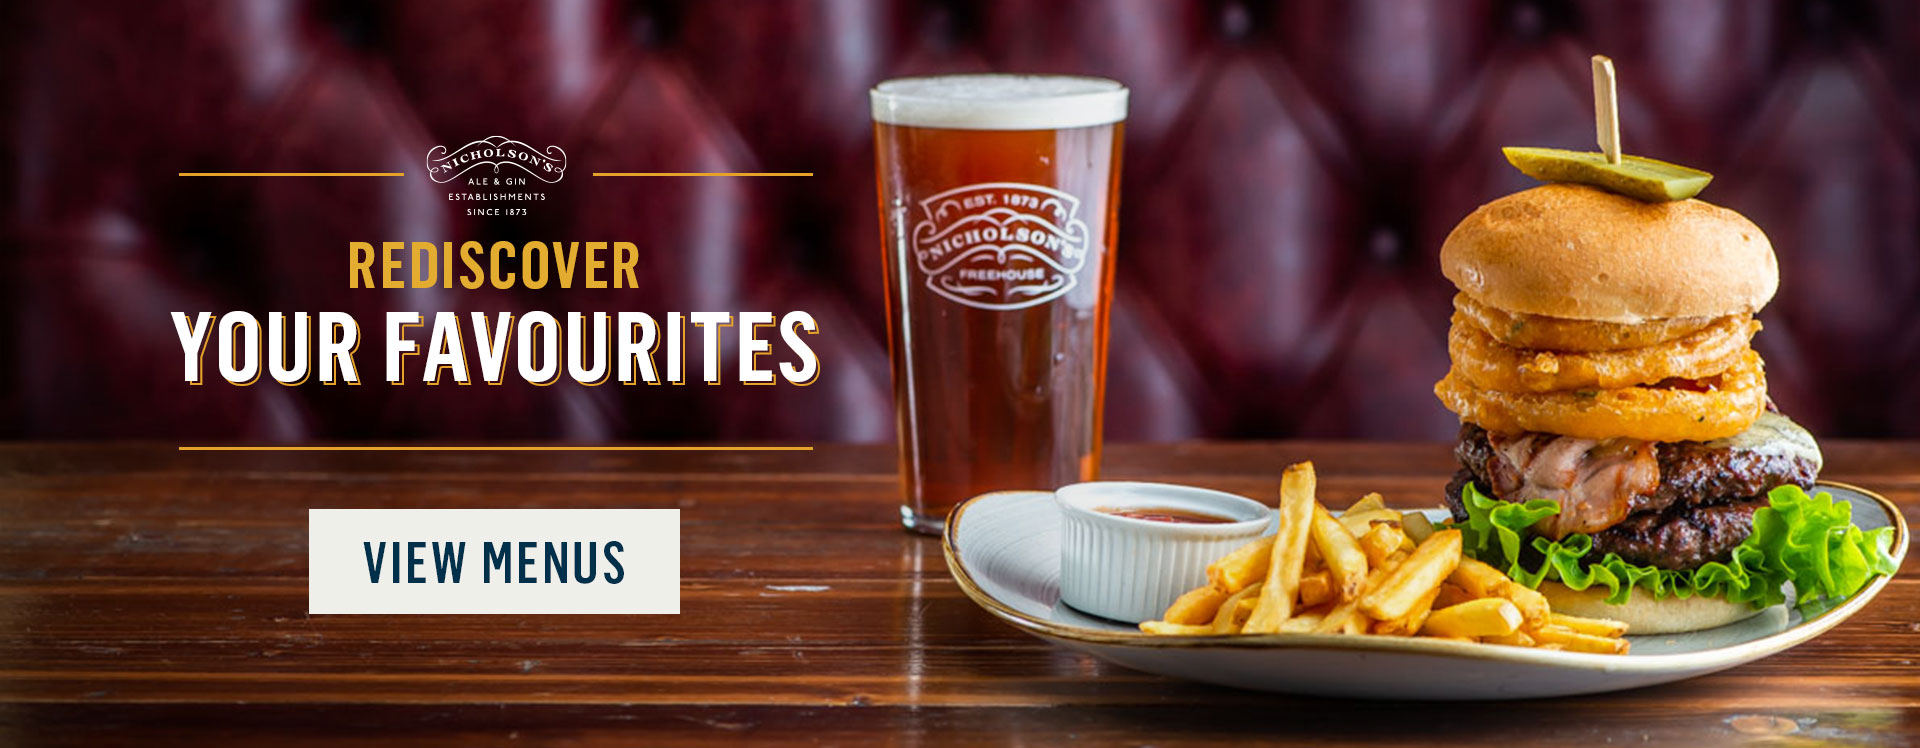 Rediscover your favourites at The Ship